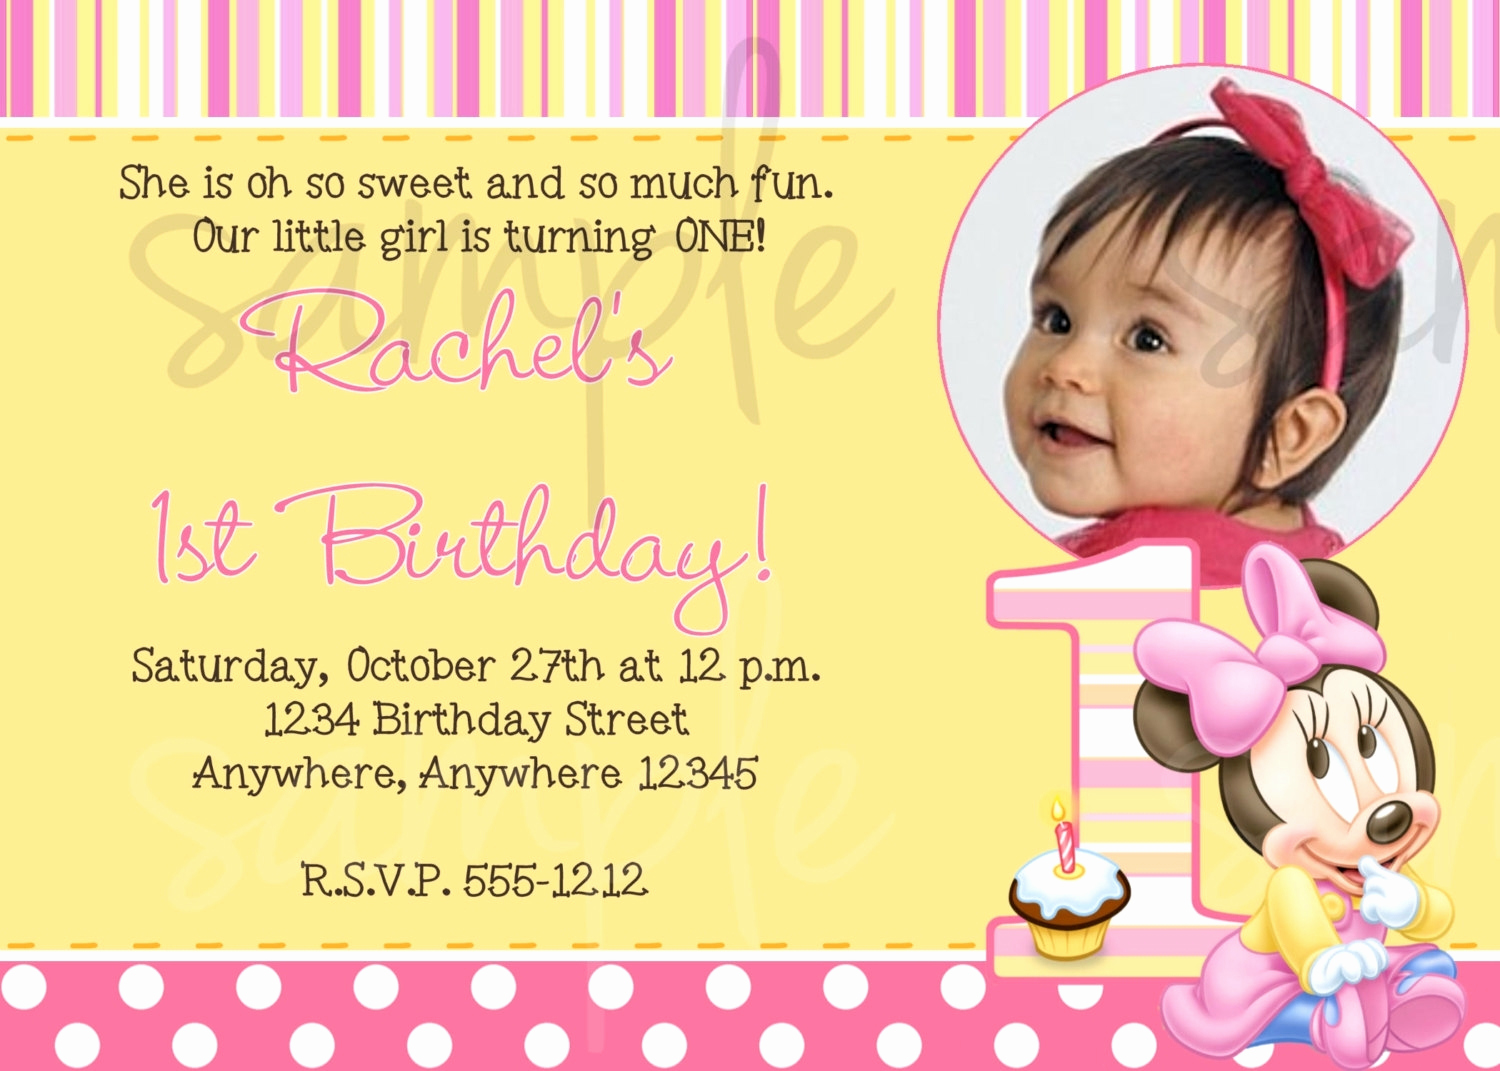 1st Birthday Invitation Wording Samples Awesome 1st Birthday Invitation Letter